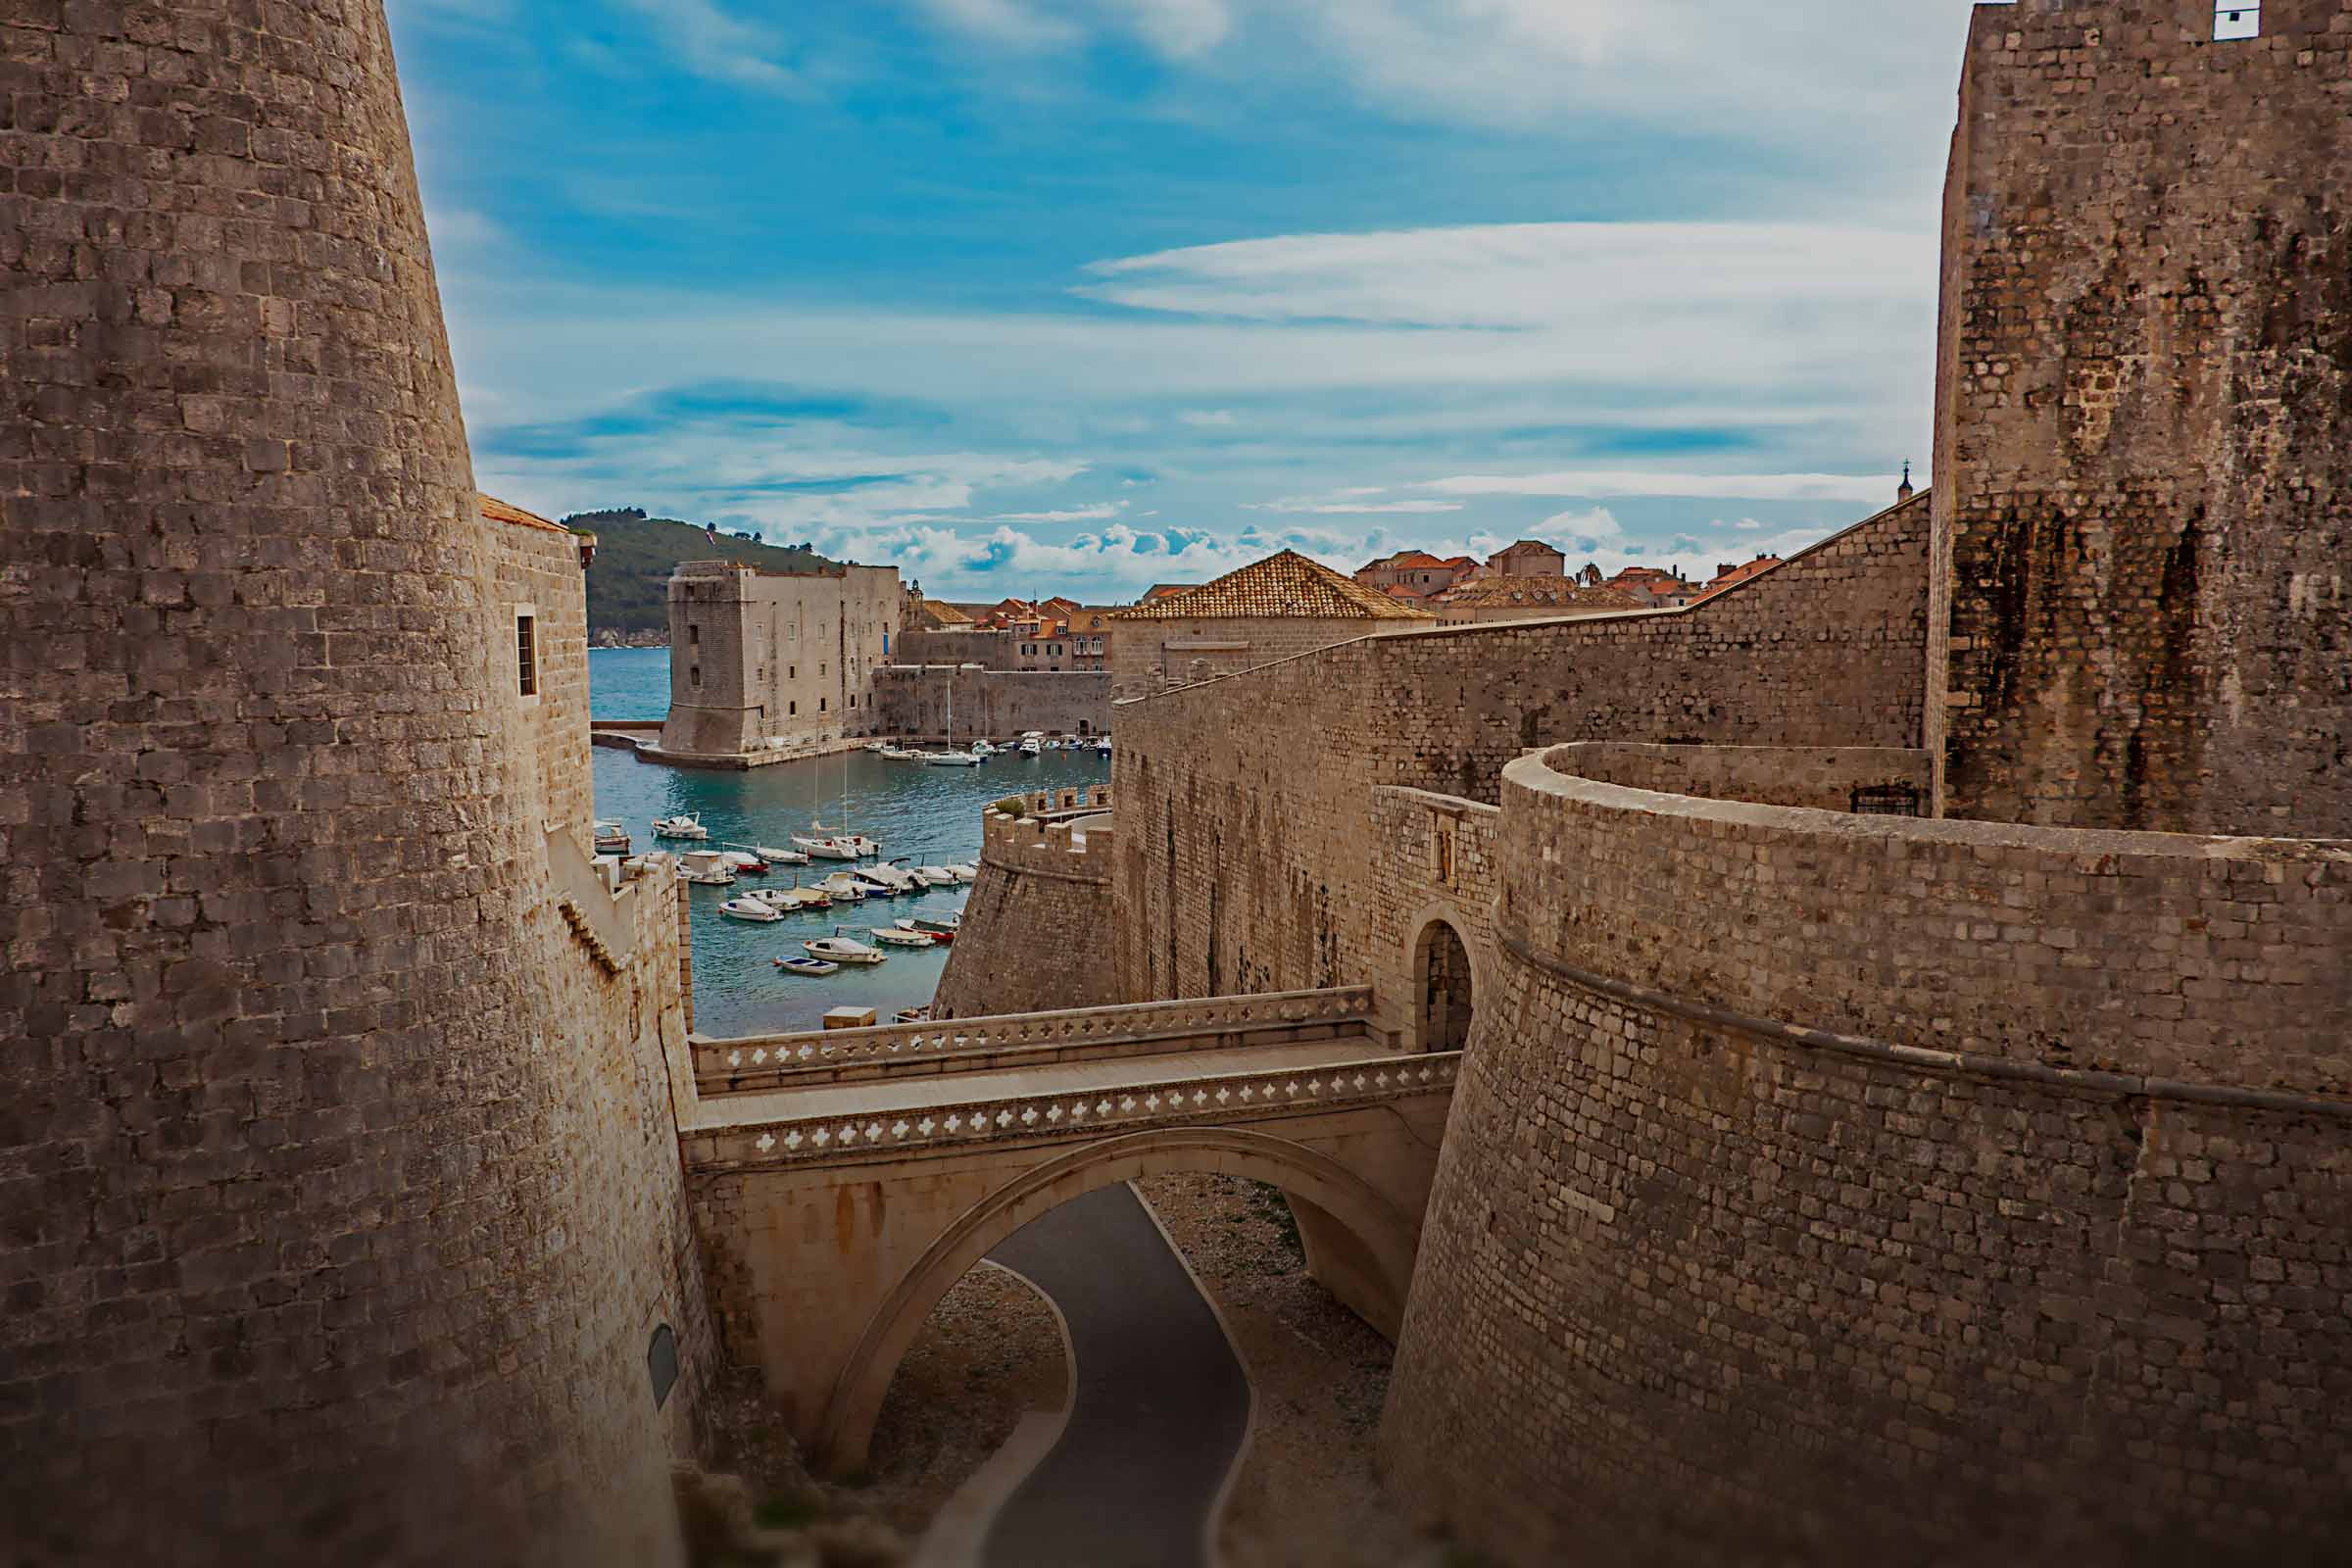 Game of Thrones Tours